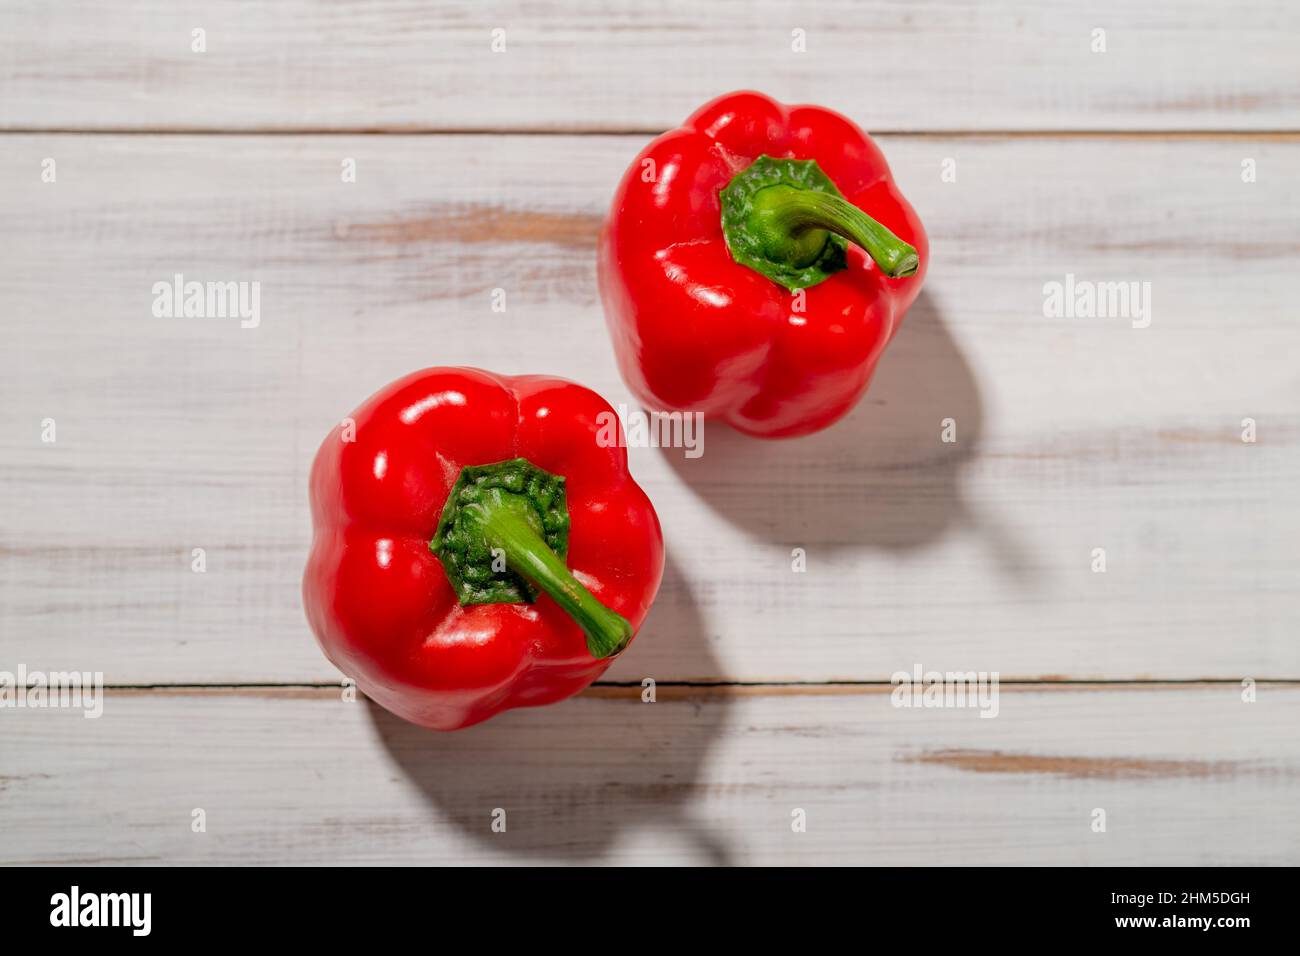 Two red sweet peppers on a wooden background. Light background. Food, vegetarian concept. Stock Photo